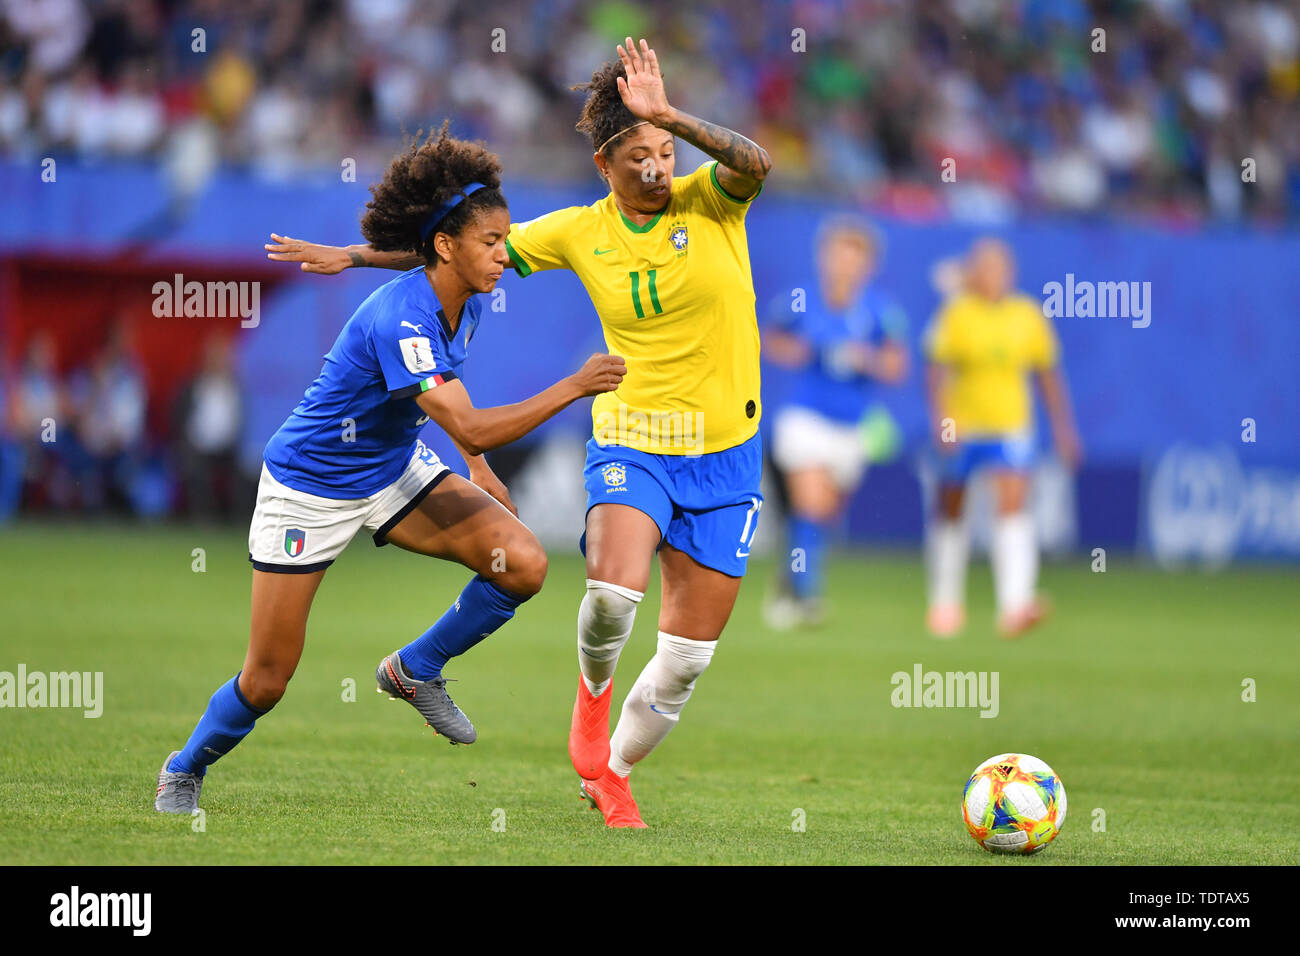 Valenciennes, Frankreich. 18th June, 2019. Sara Gama (Italy) (3) in a duel with Cristiane (Brazil) (11), 18.06.2019, Valenciennes (France), Football, FIFA Women's World Cup 2019, Italy - Brazil, FIFA REGULATIONS PROHIBIT ANY USE OF PHOTOGRAPHS AS IMAGE SEQUENCES AND/OR QUASI VIDEO. | usage worldwide Credit: dpa/Alamy Live News Stock Photo